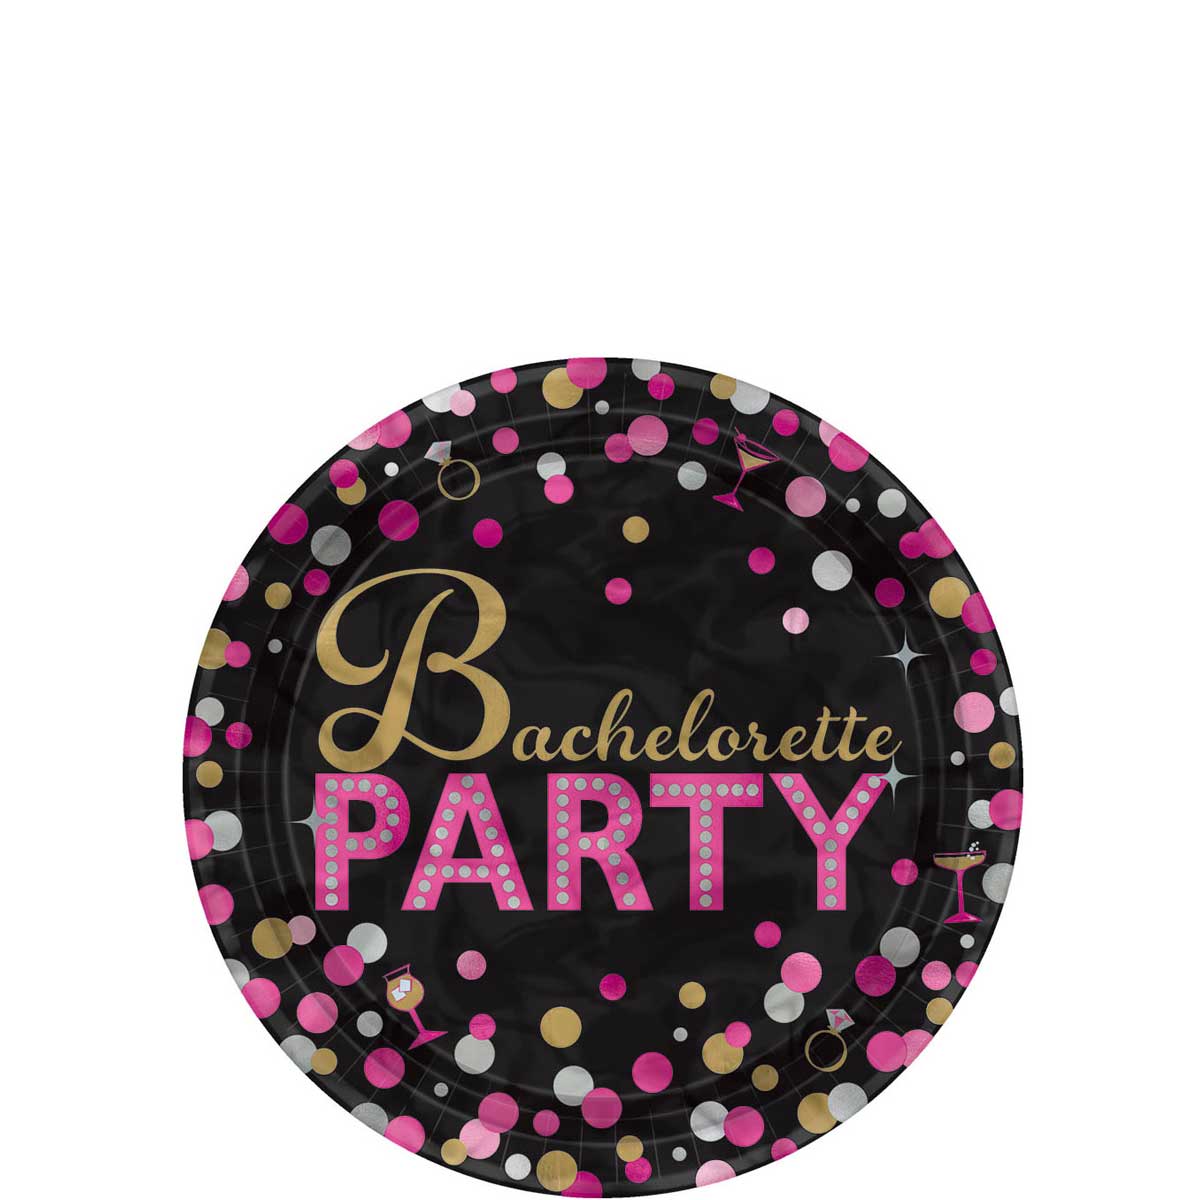 Bachelorette Night Metallic Plates 7in, 8pcs Printed Tableware - Party Centre - Party Centre